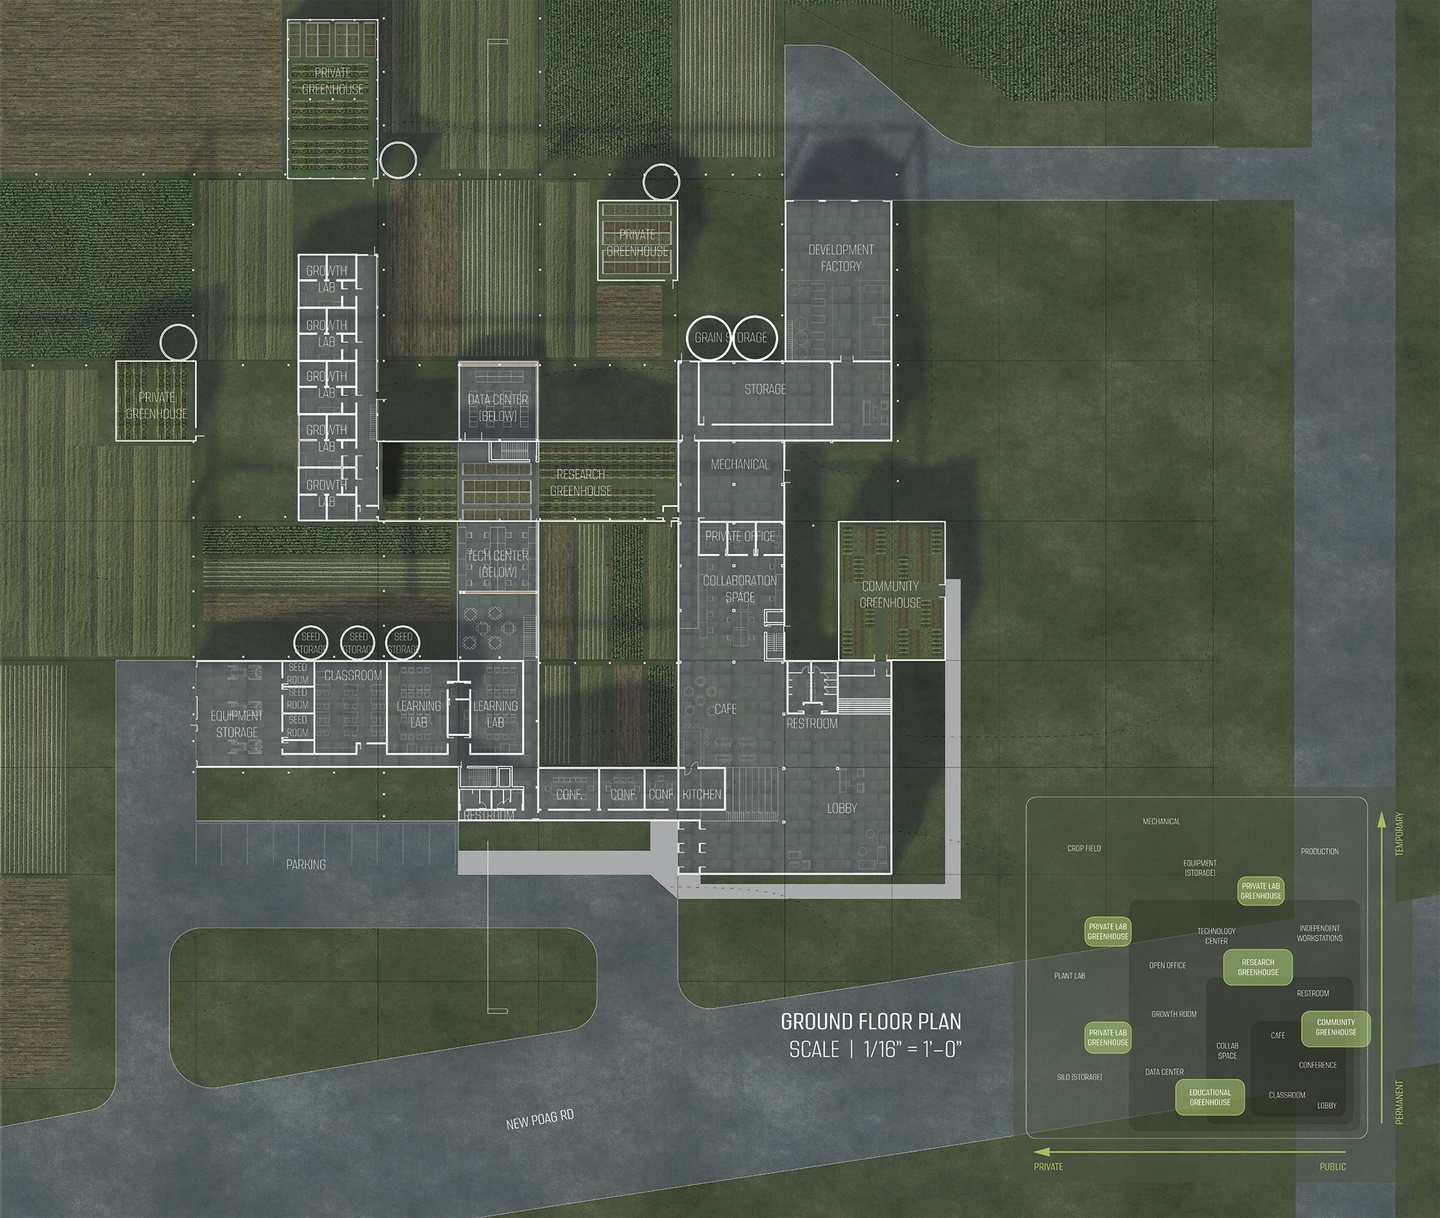 Computer rendering of ground floor plan with linework and text in white in a saturated green landscaped site context. Text labels include: private greenhouses, growth labs, data center, seed storage, seed rooms, equipment storage, learning labs, tech centers, restroom, conferences, research greenhouse, parking, kitchen, cafe, lobby, collaboration space, private office, mechanical, community greenhouse, storage, grain storage, and development factory.